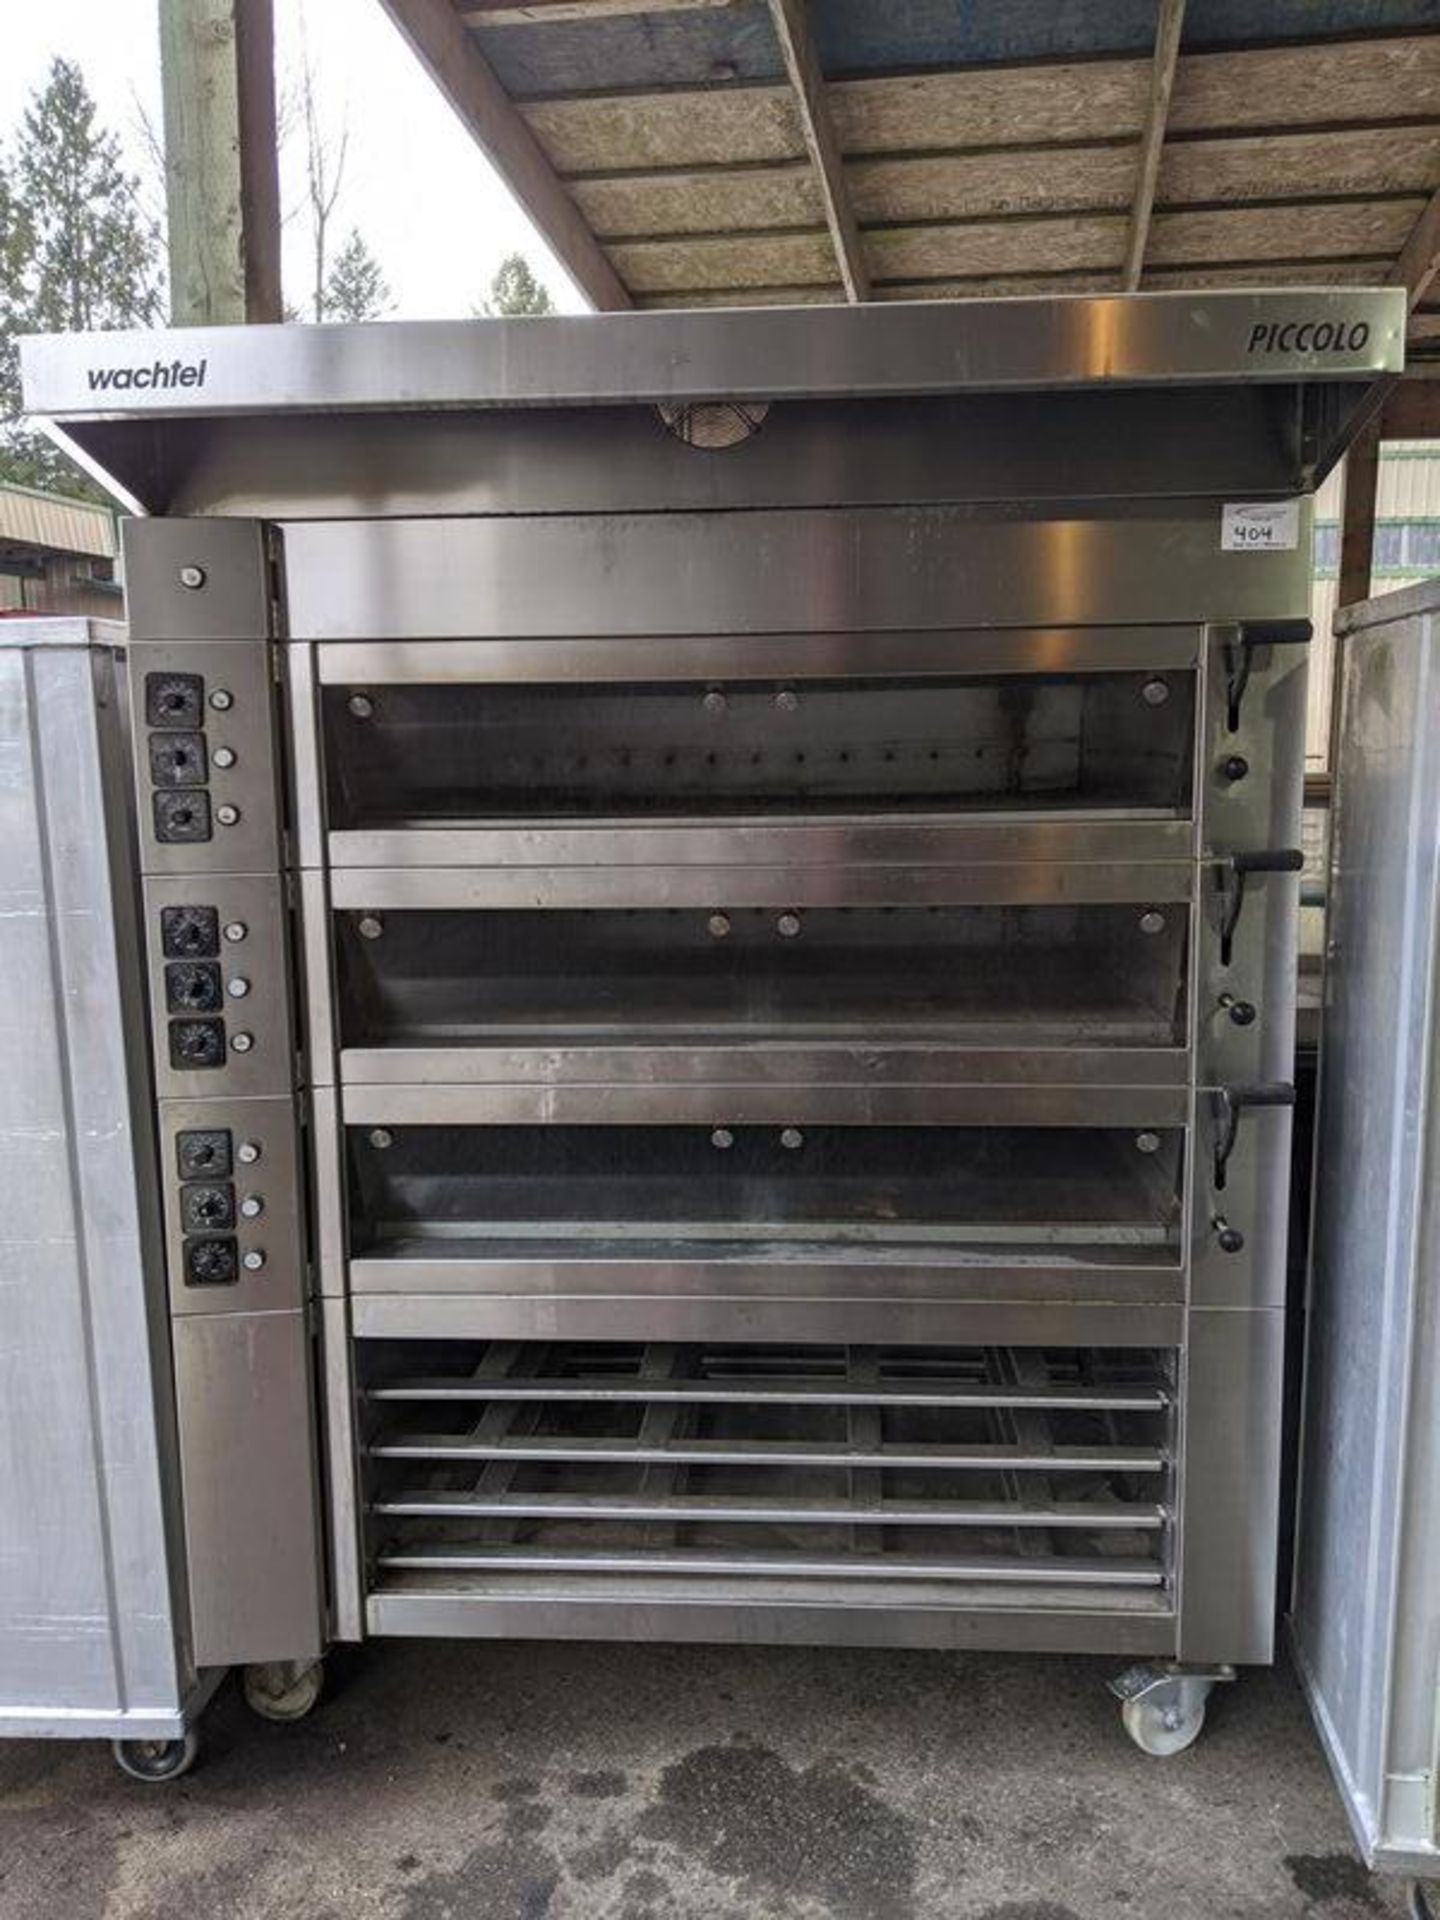 Wachtel Piccolo 3 Deck Electric Oven with Steam